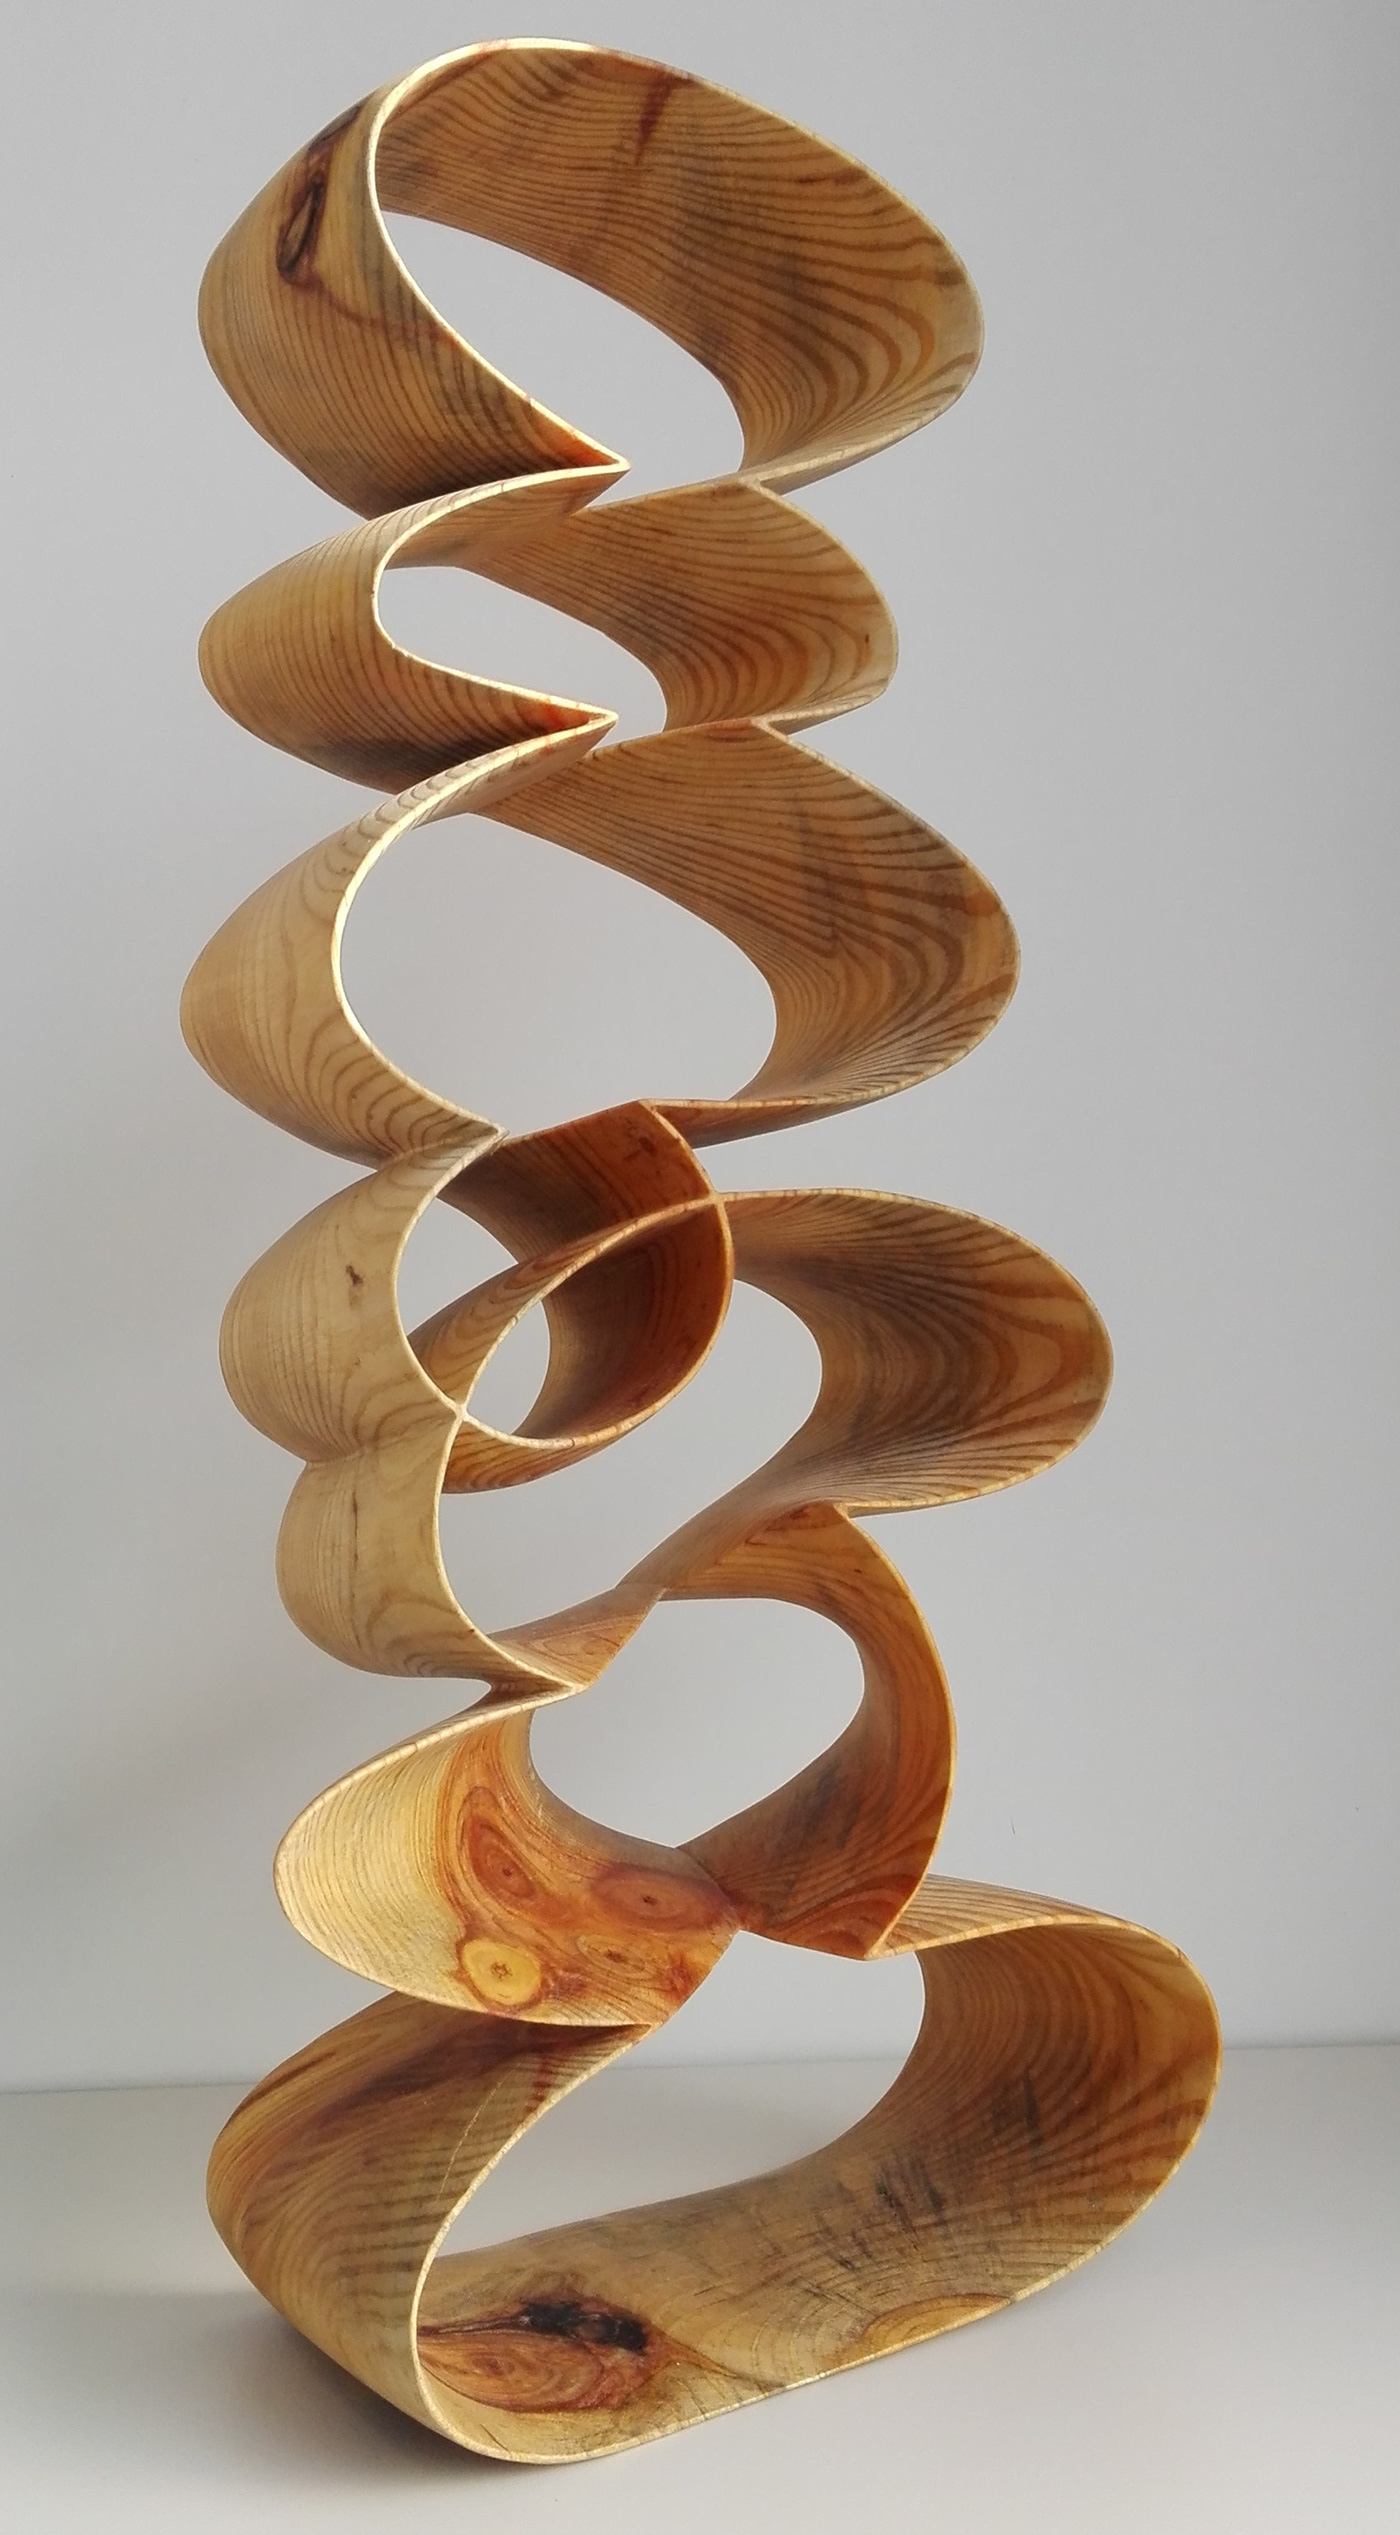 wood woodworking sculpture woodcarving madera Fusta 